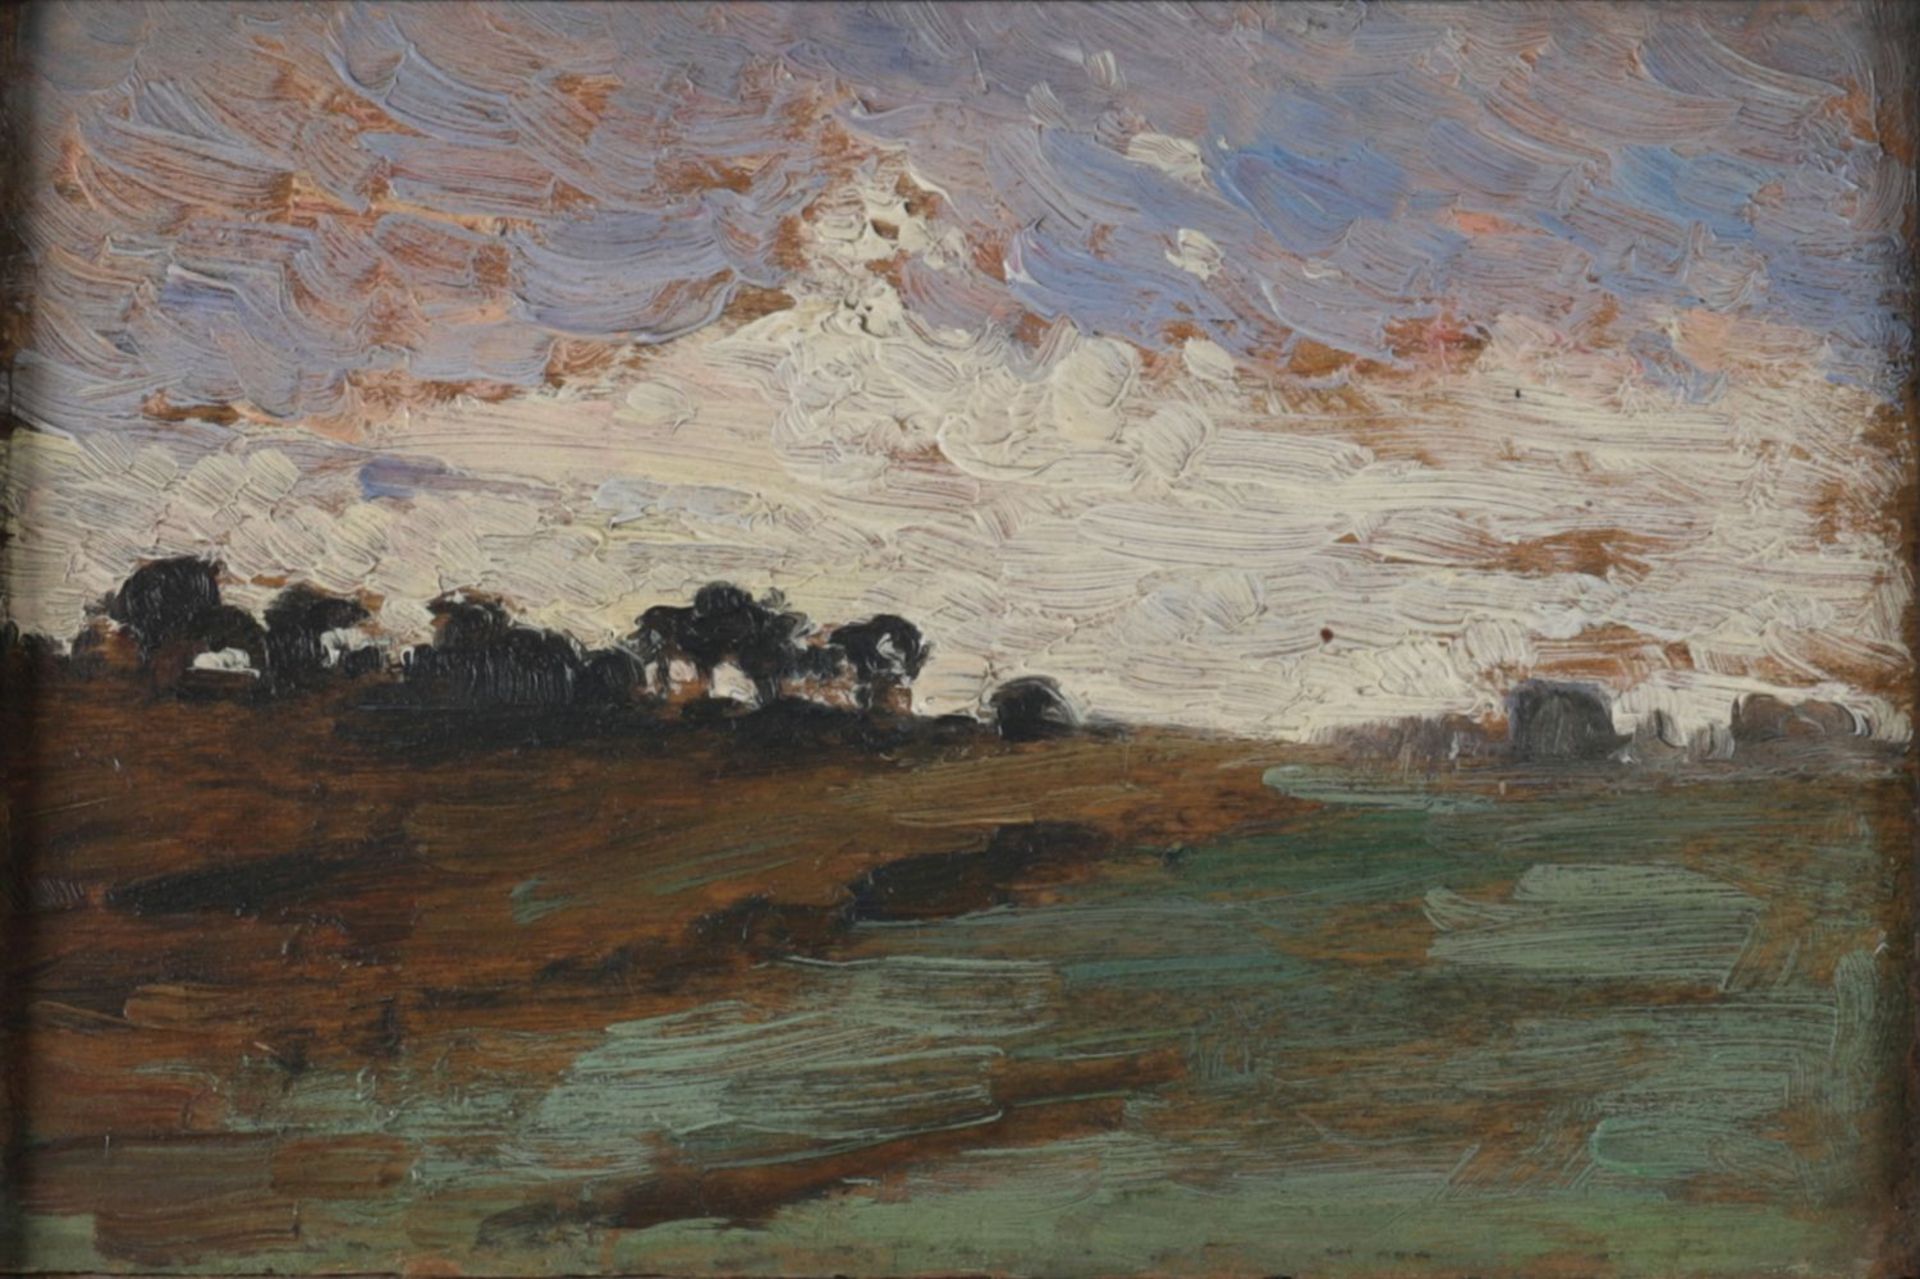 ATTRIBUTED TO RODERIC O'CONOR